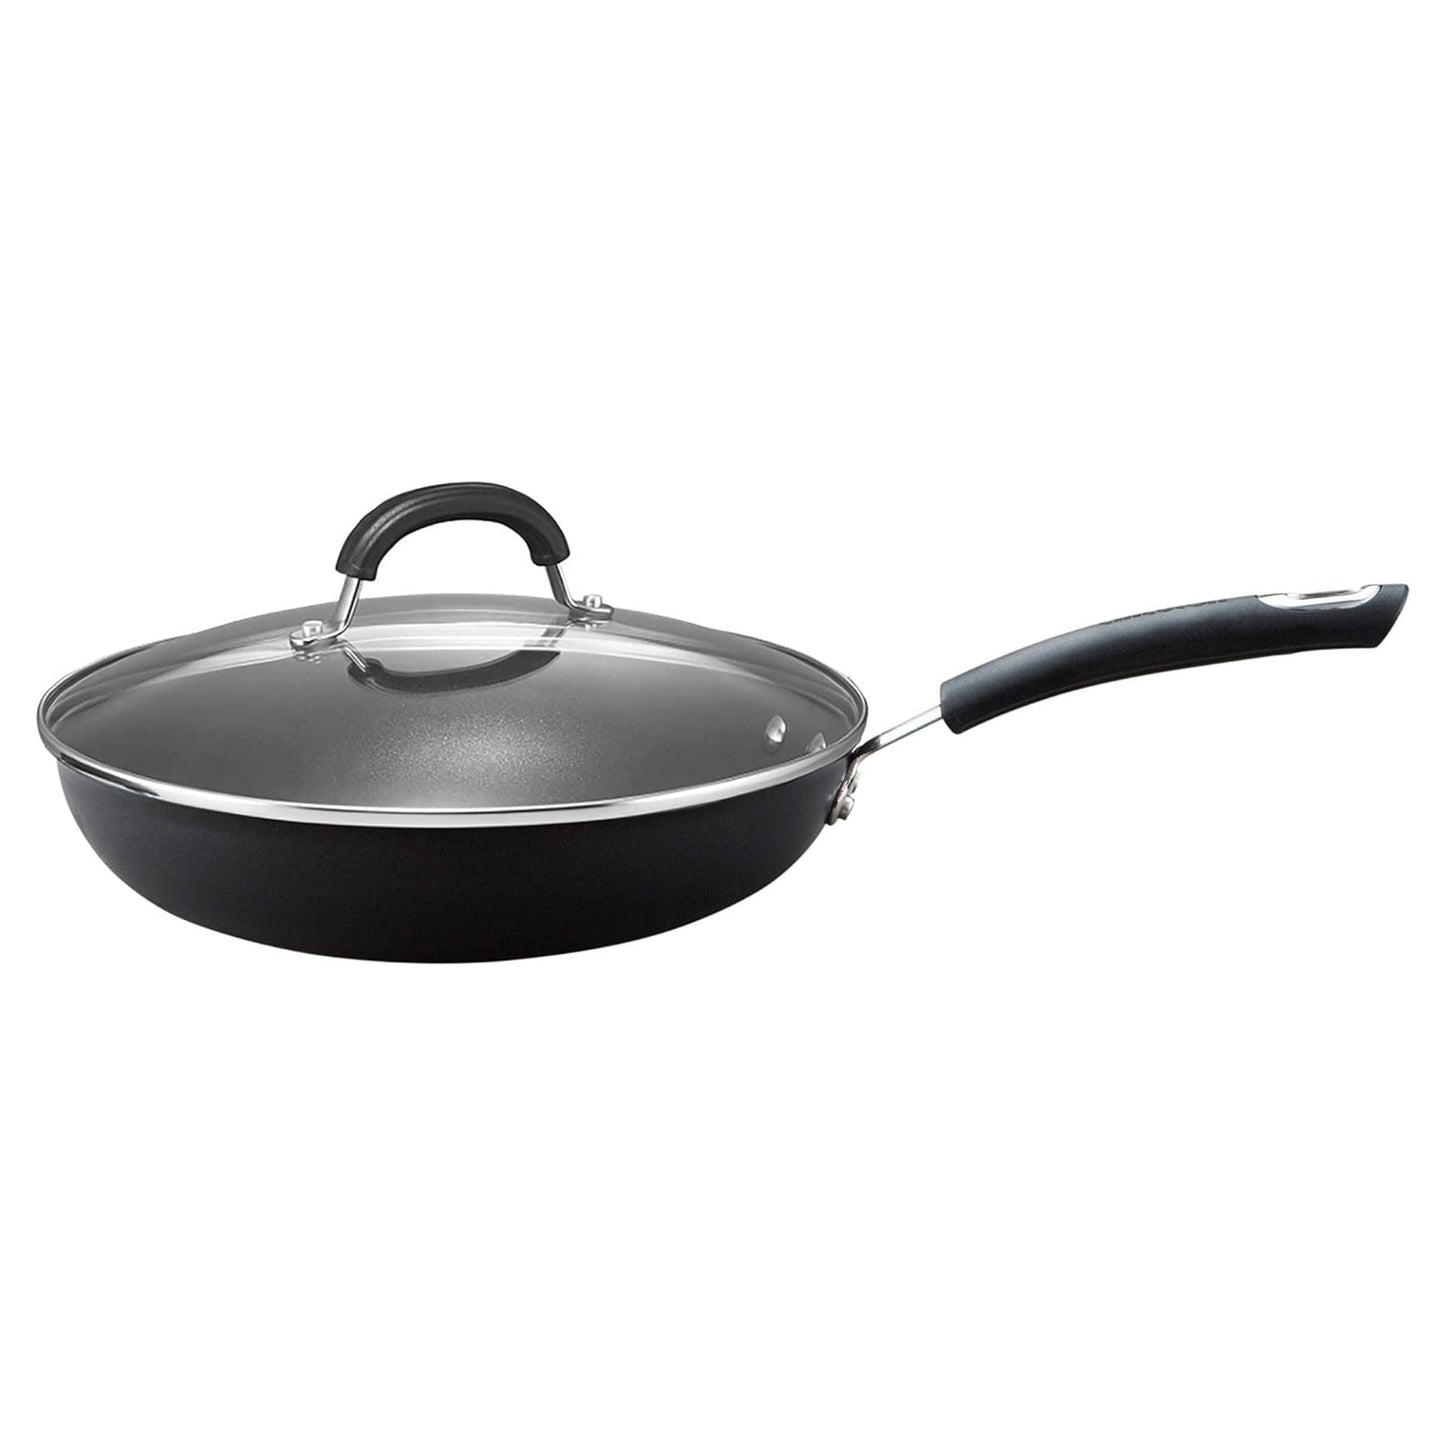 Circulon Total Nonstick Induction Covered Skillet 31cm